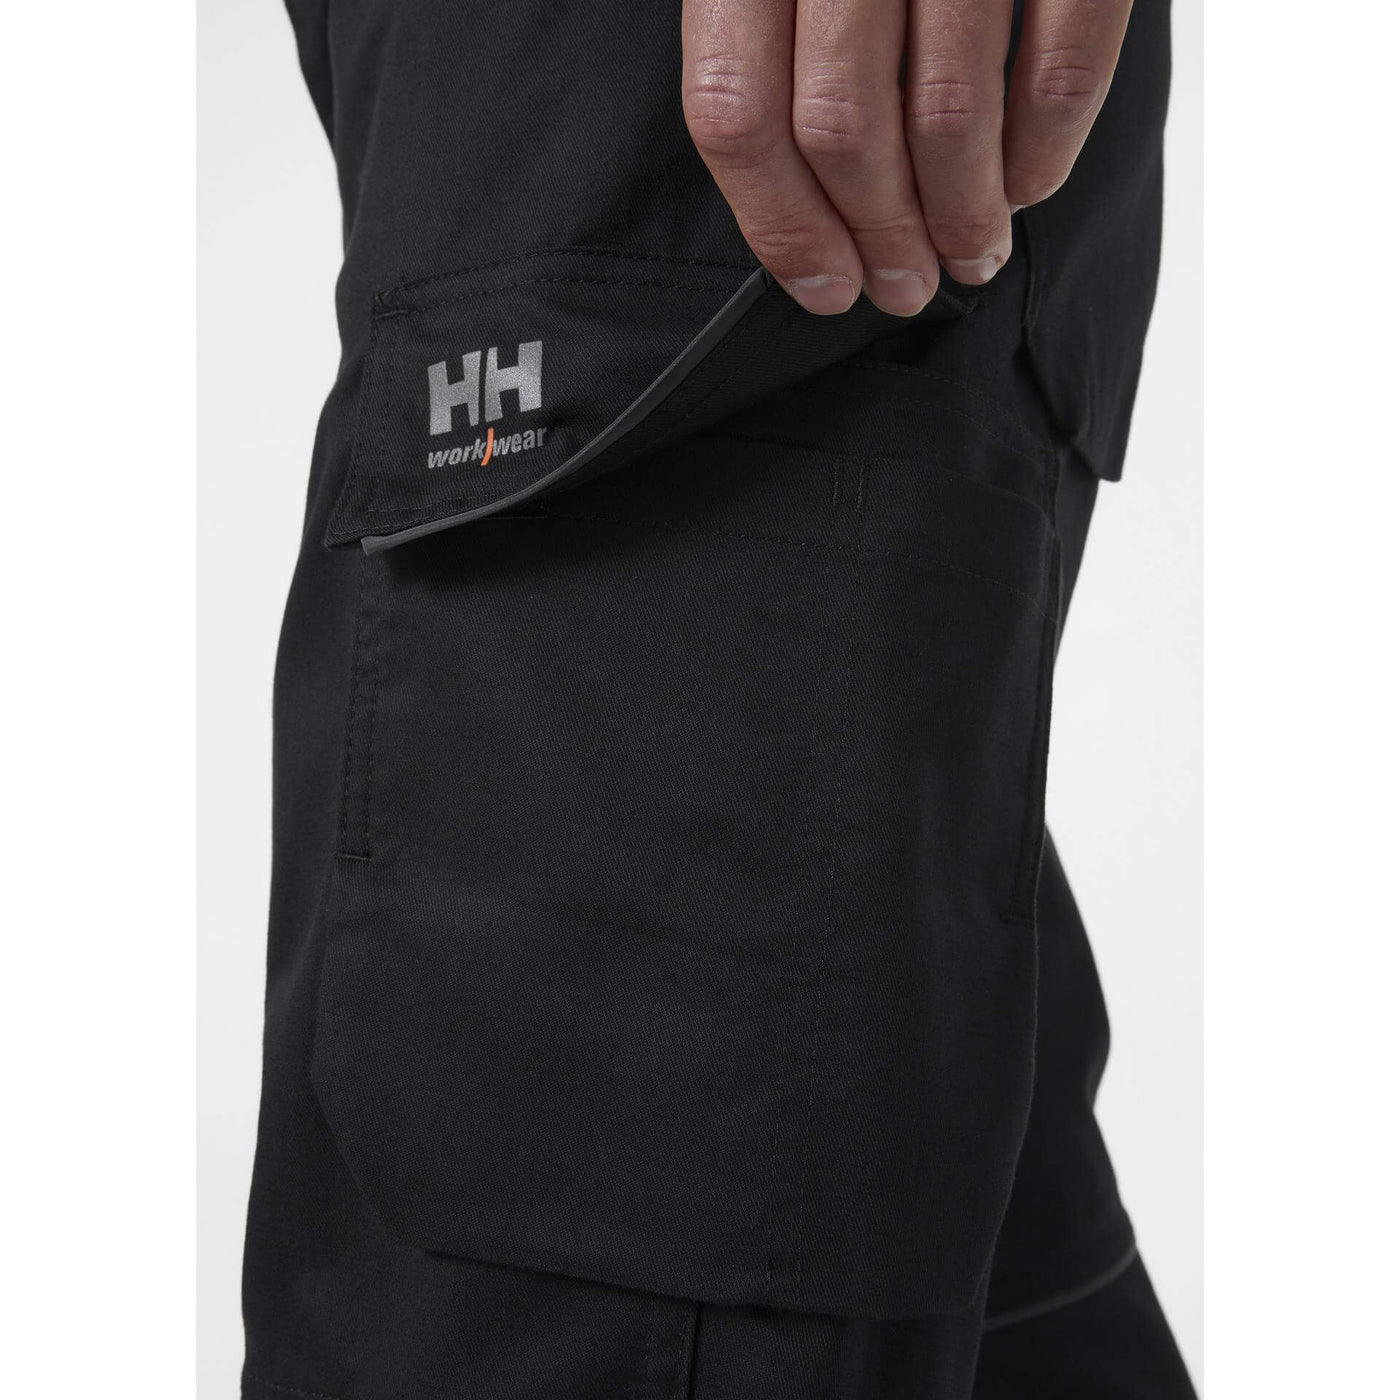 Helly Hansen Manchester Stretch Work Trousers Black 6 Feature 2#colour_black